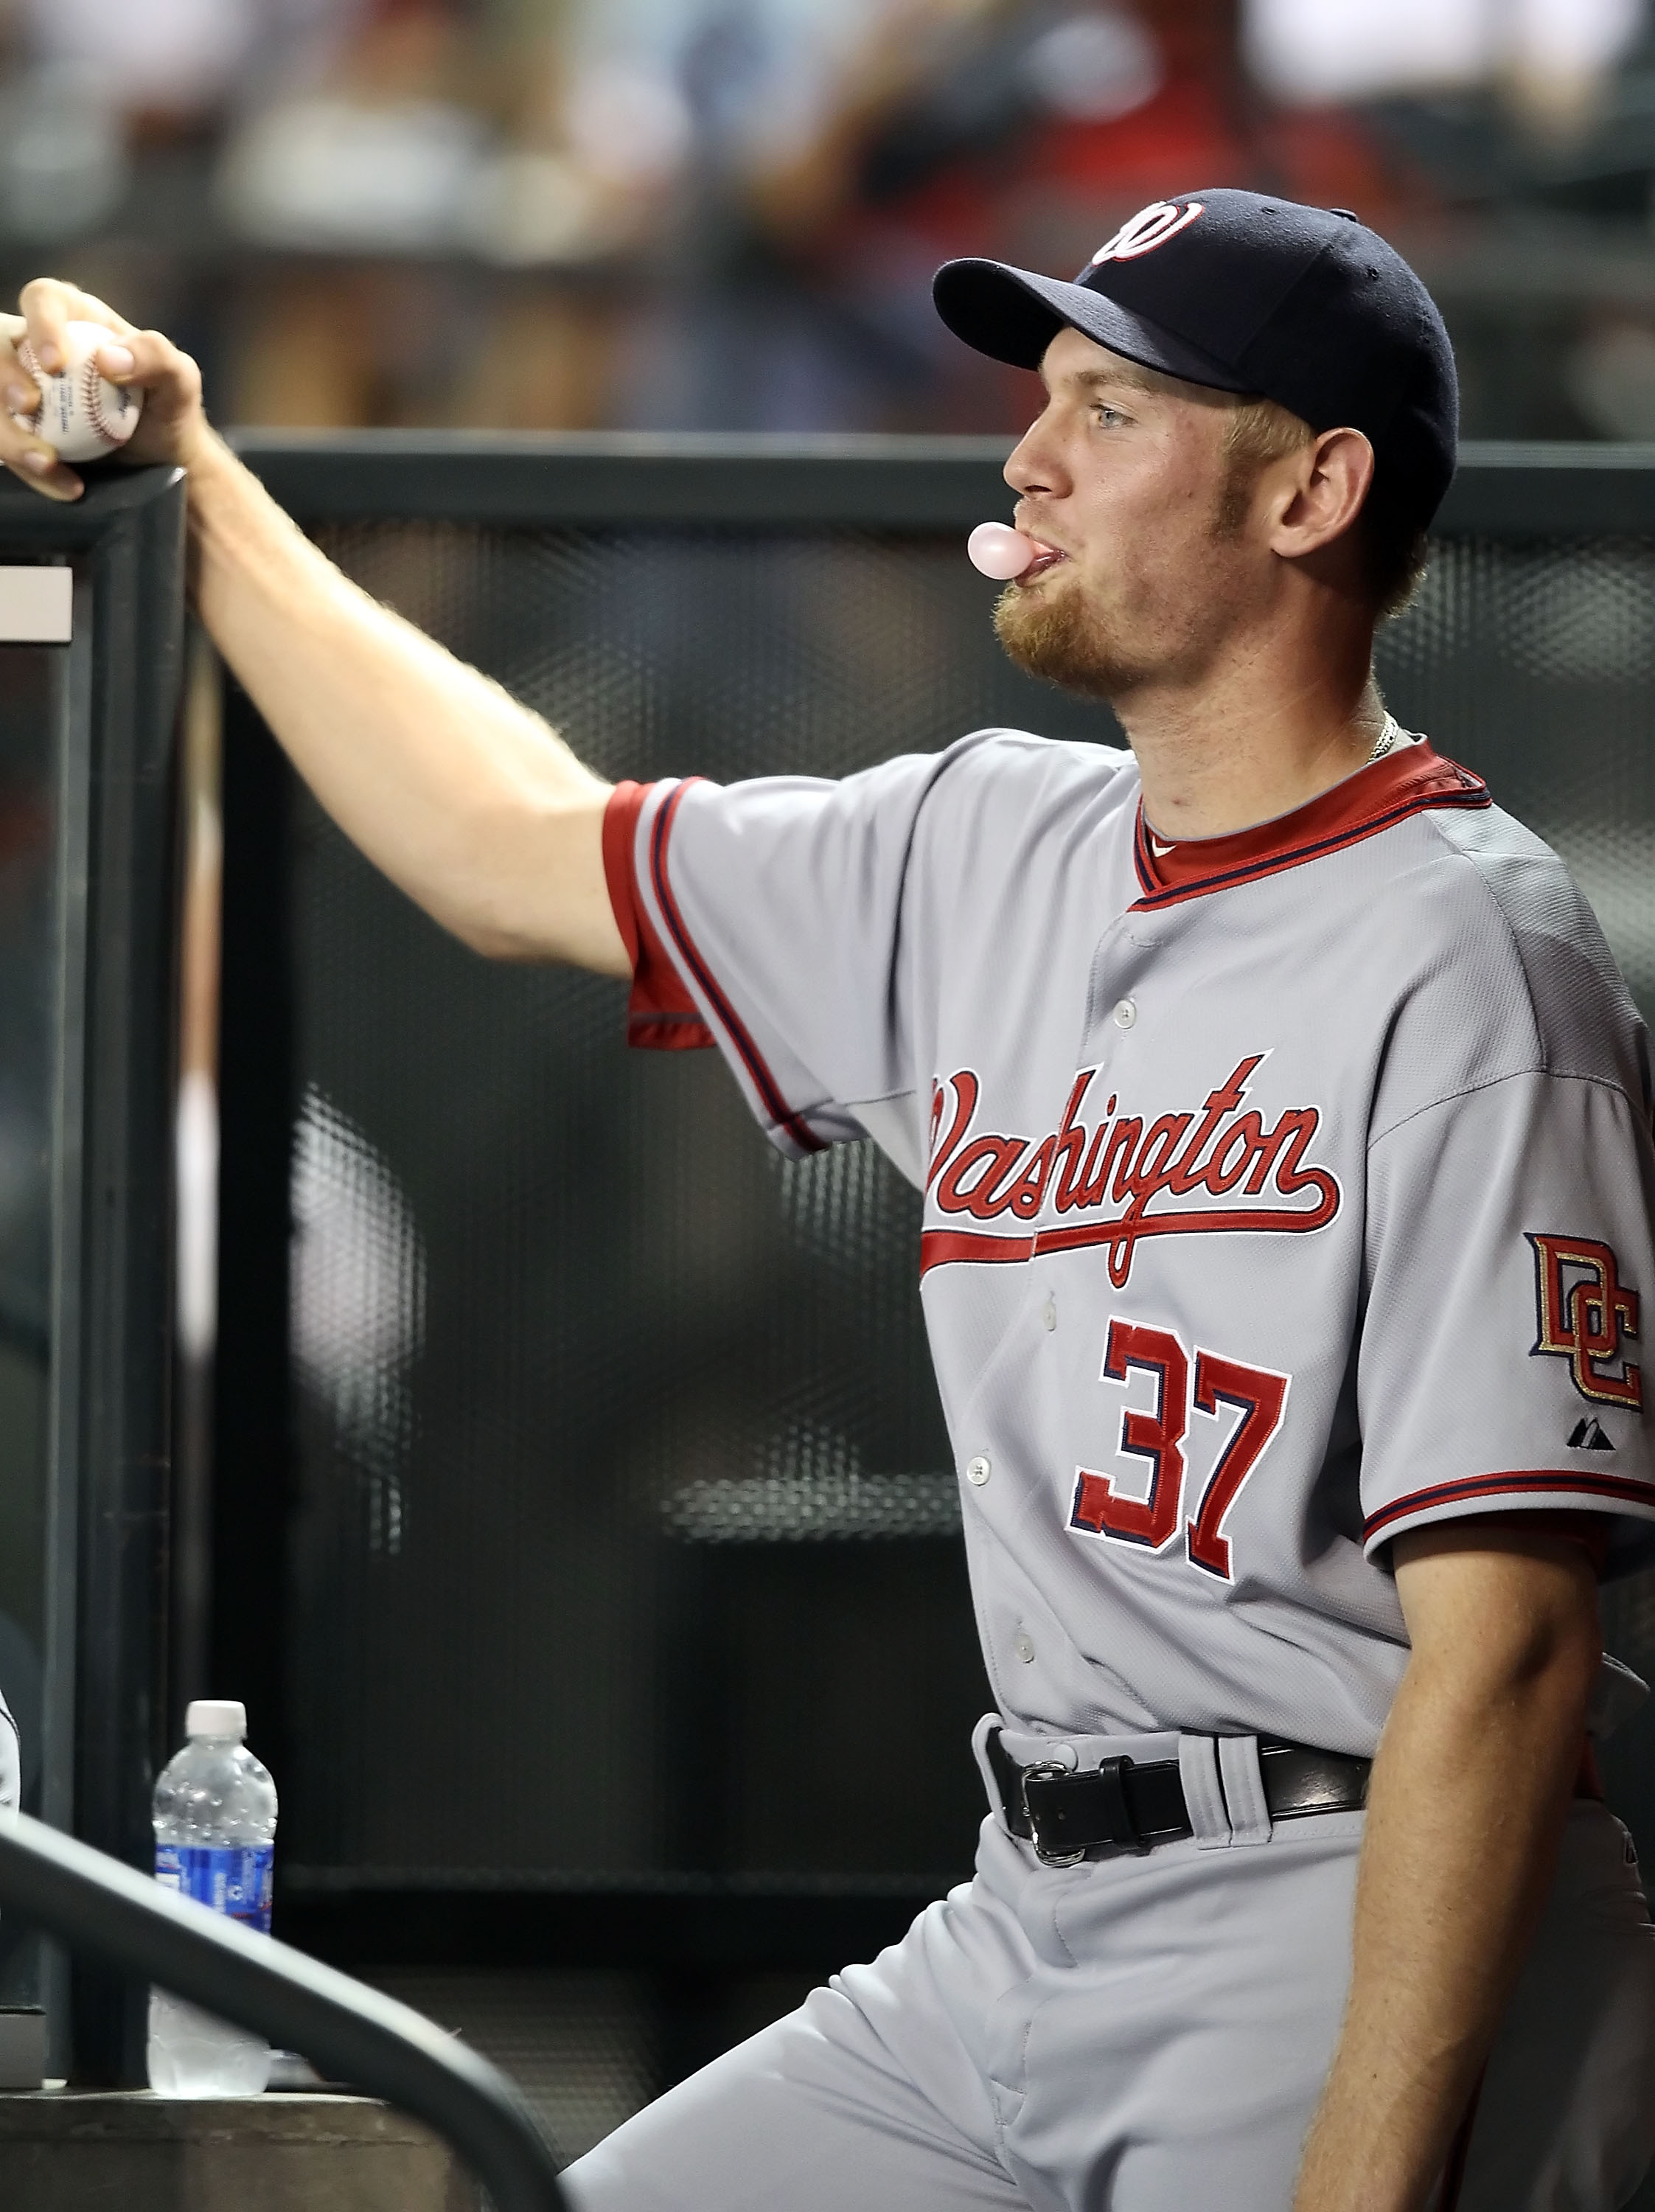 June 8, 2010: Stephen Strasburg strikes out 14 in MLB debut – Society for  American Baseball Research